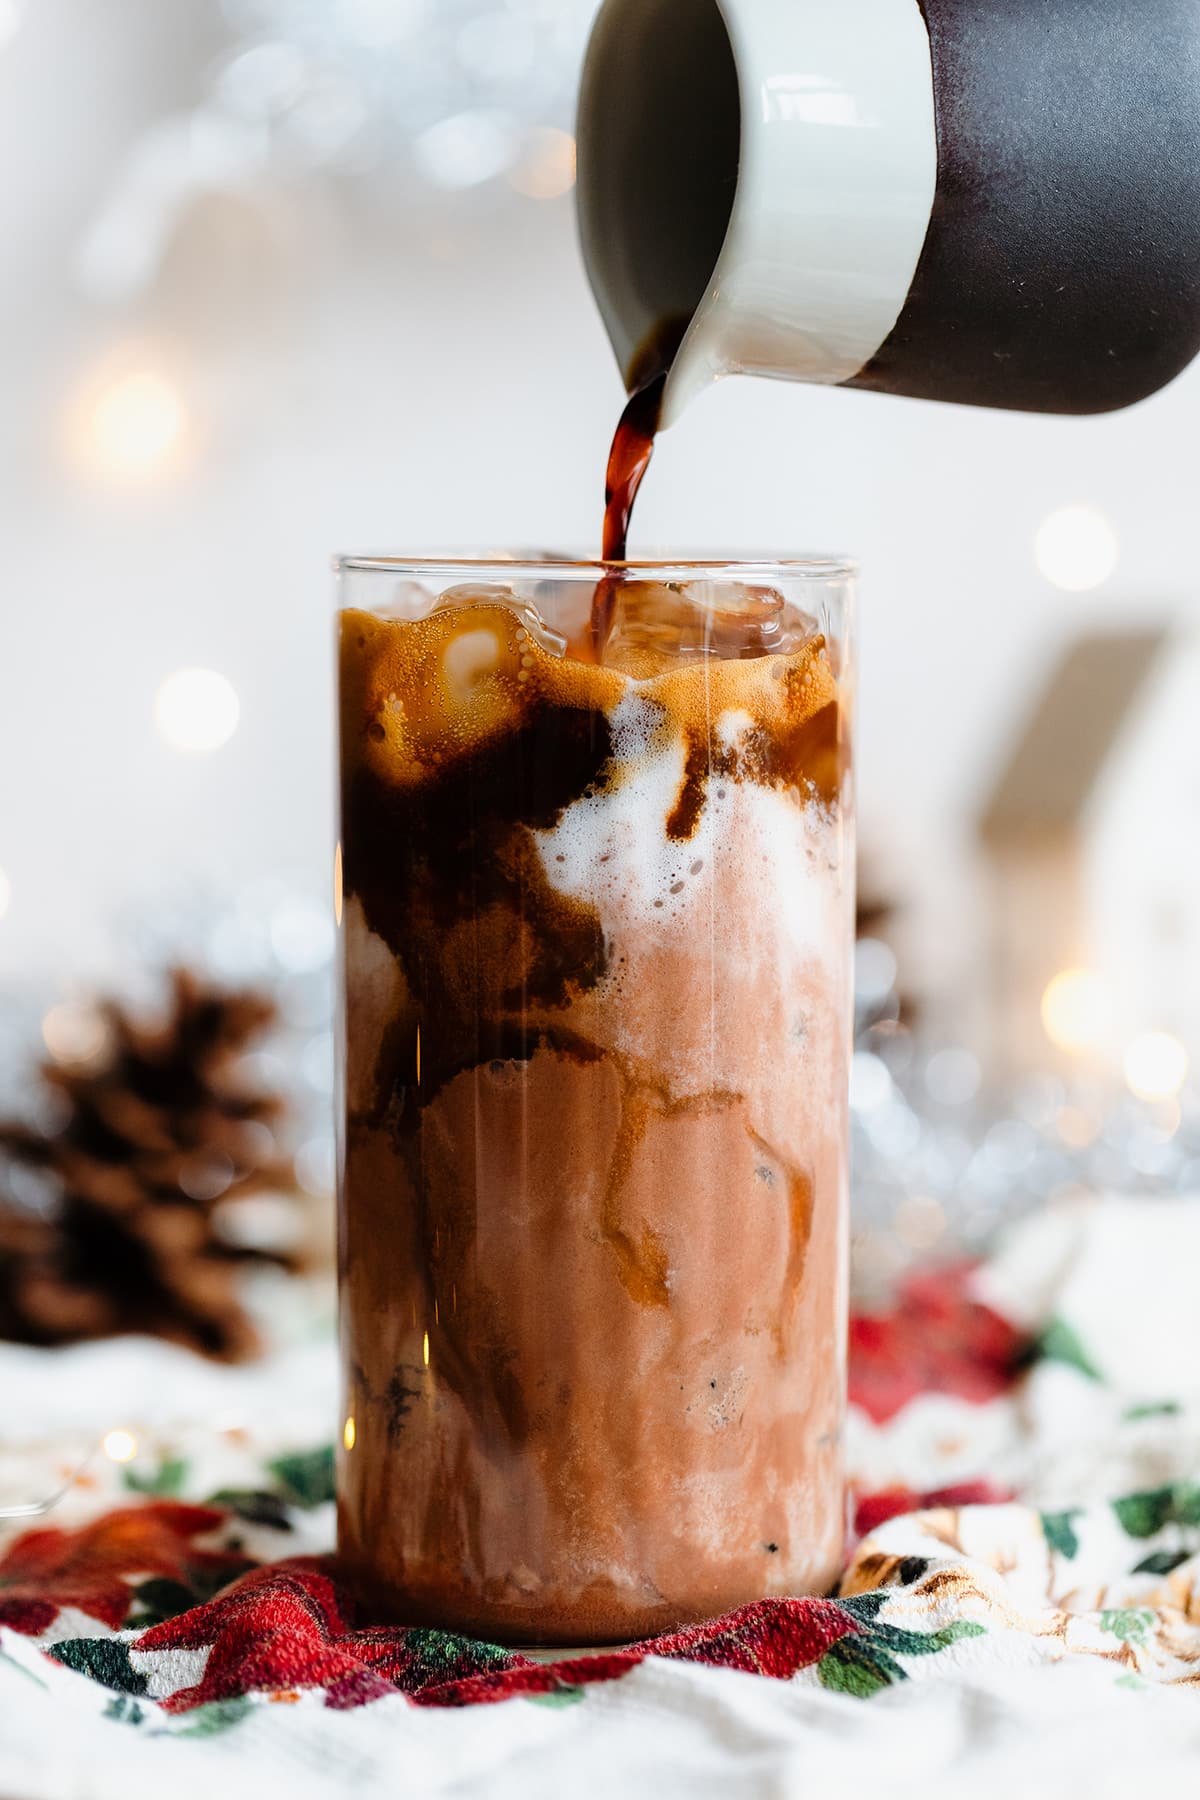 Chocolate milk and ice in a tall glass with espresso being poured over it.